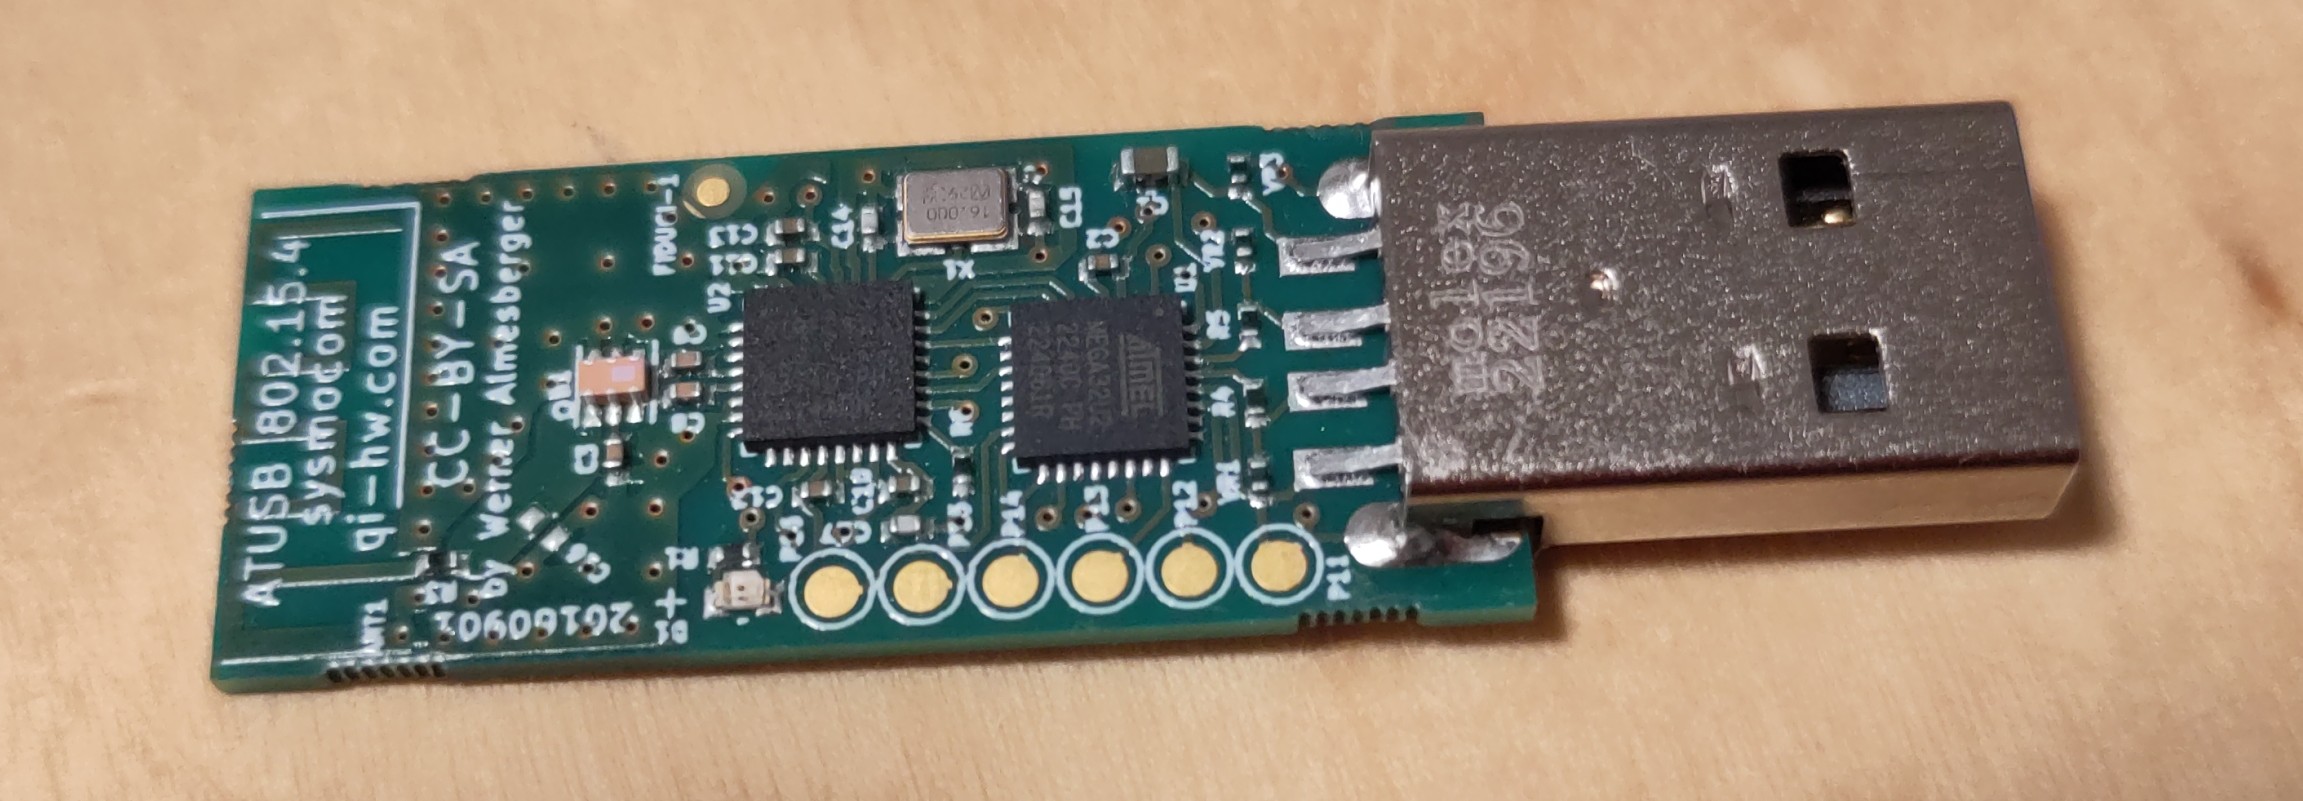 You can see a circuit board. There is a USB port on the right side. On the left side you can see an antenna built into the circuit board. Two distinctive black chips can be seen on the circuit board. The board itself is green.